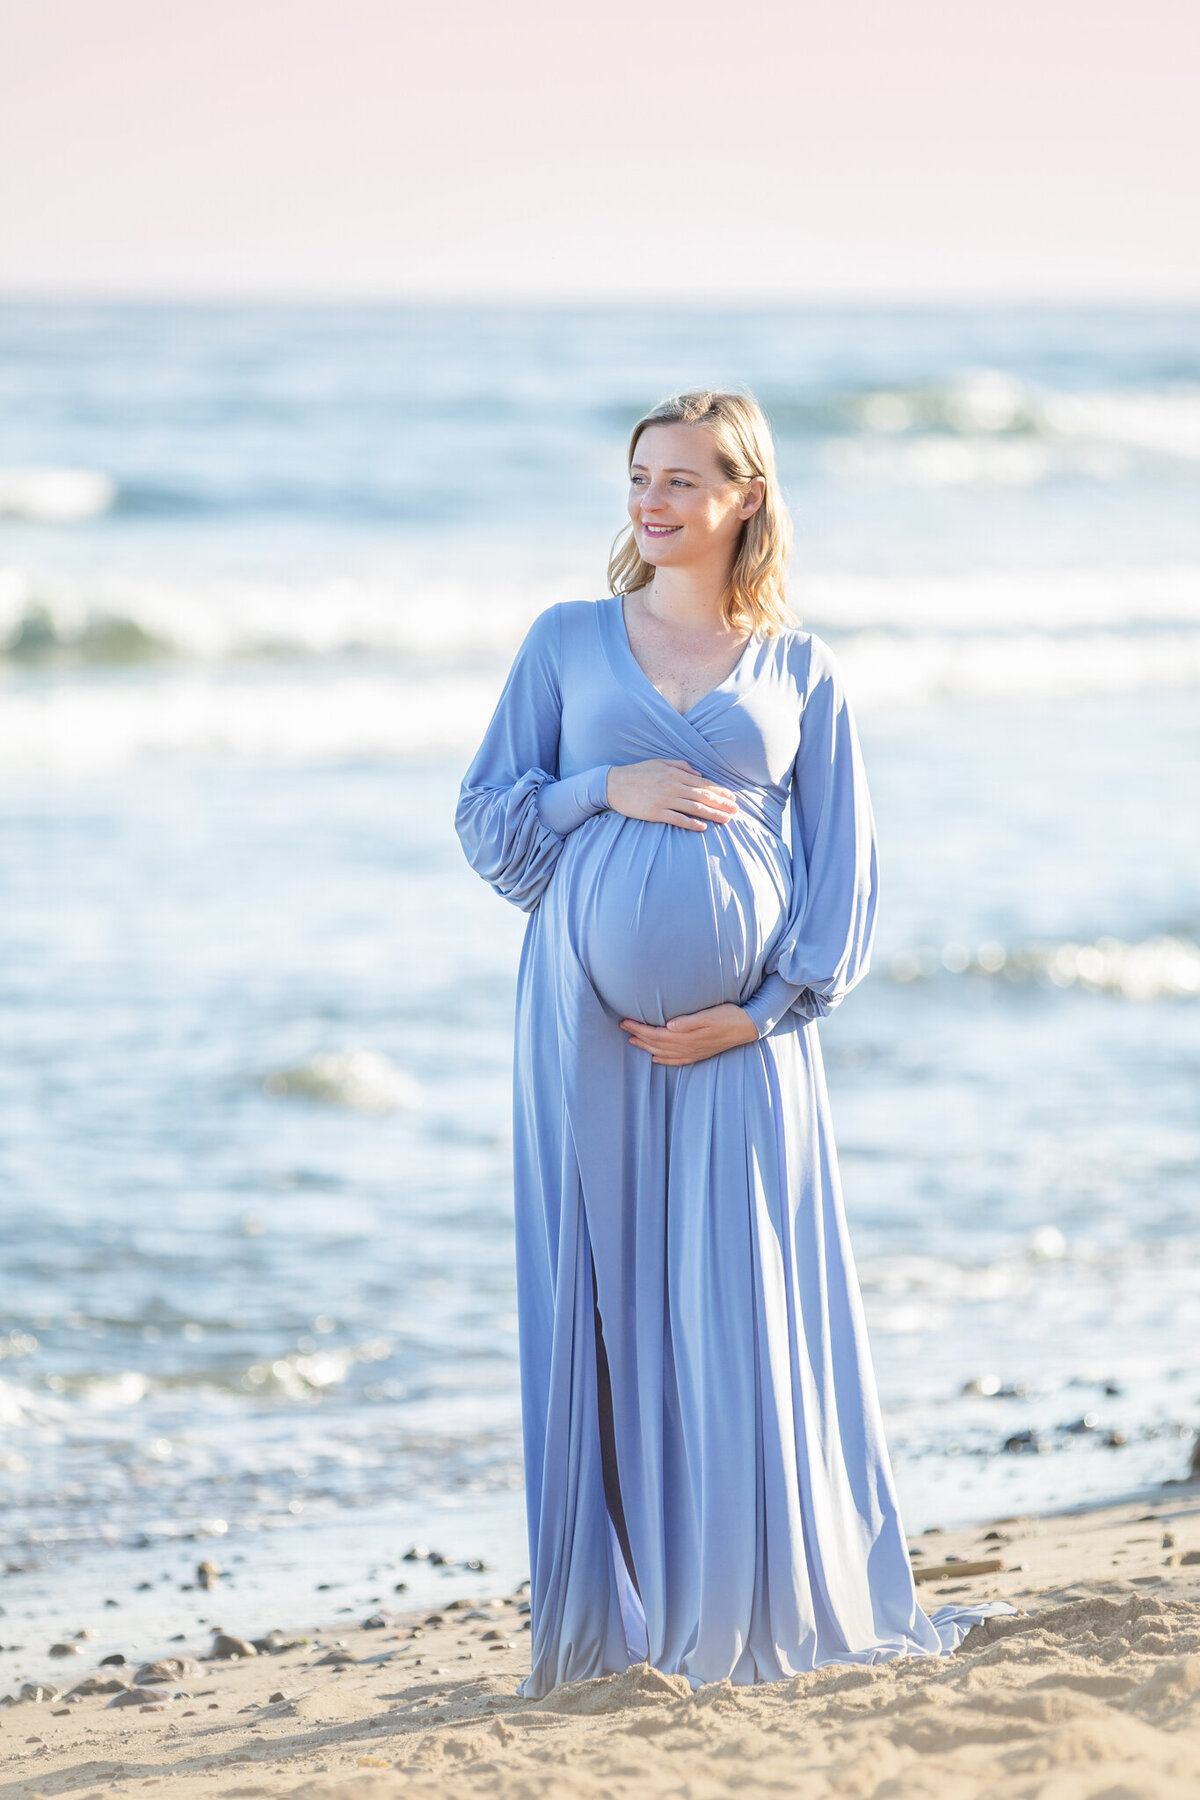 Mom to be in a long blue gown awaiting her baby boy and looking into the distance - Los Angeles Maternity Photographer